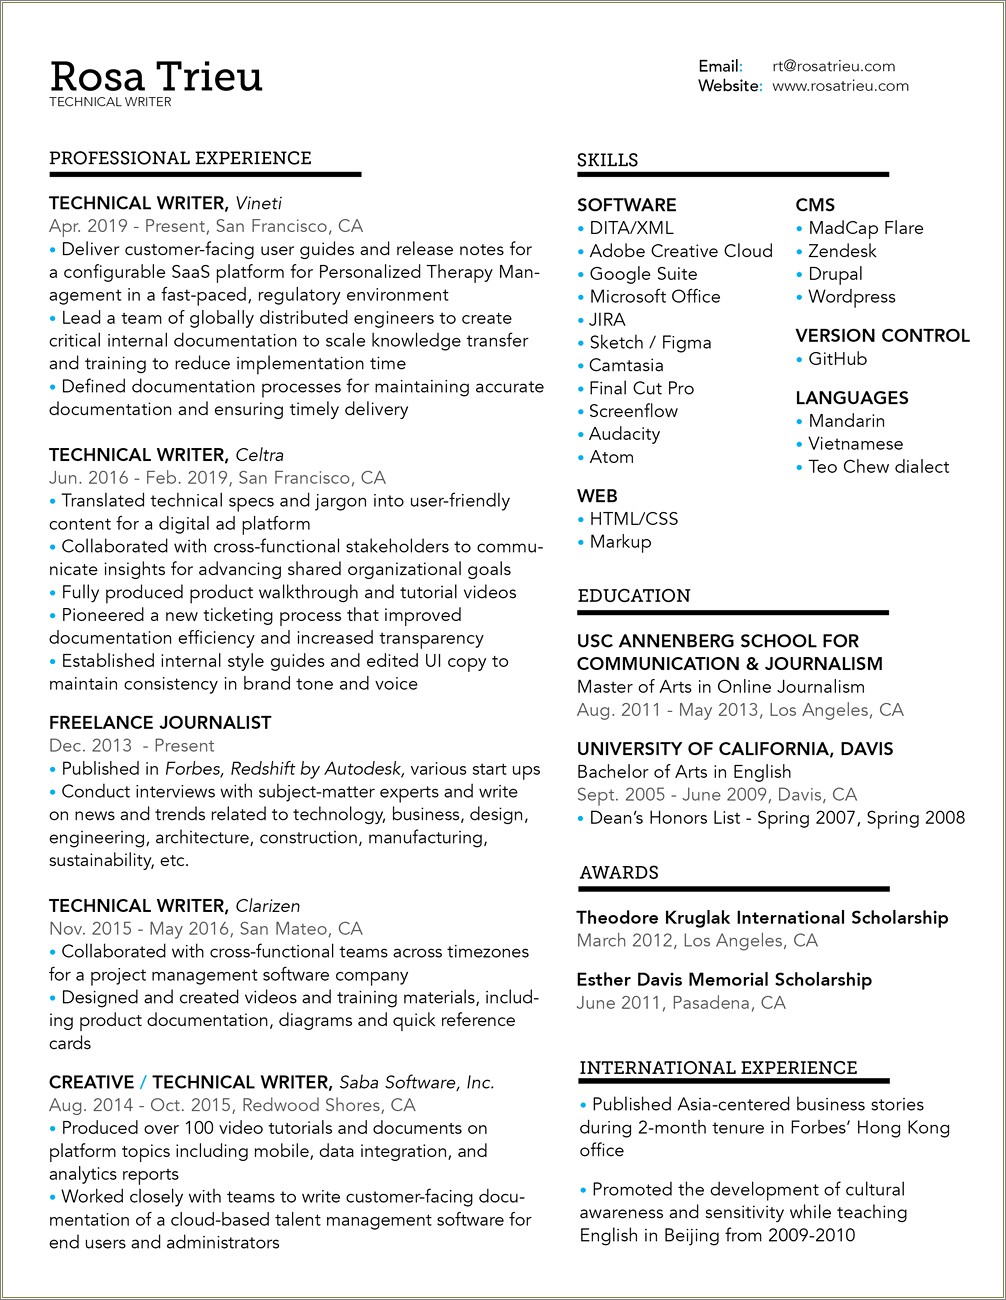 Resume References Example Available Upon Request